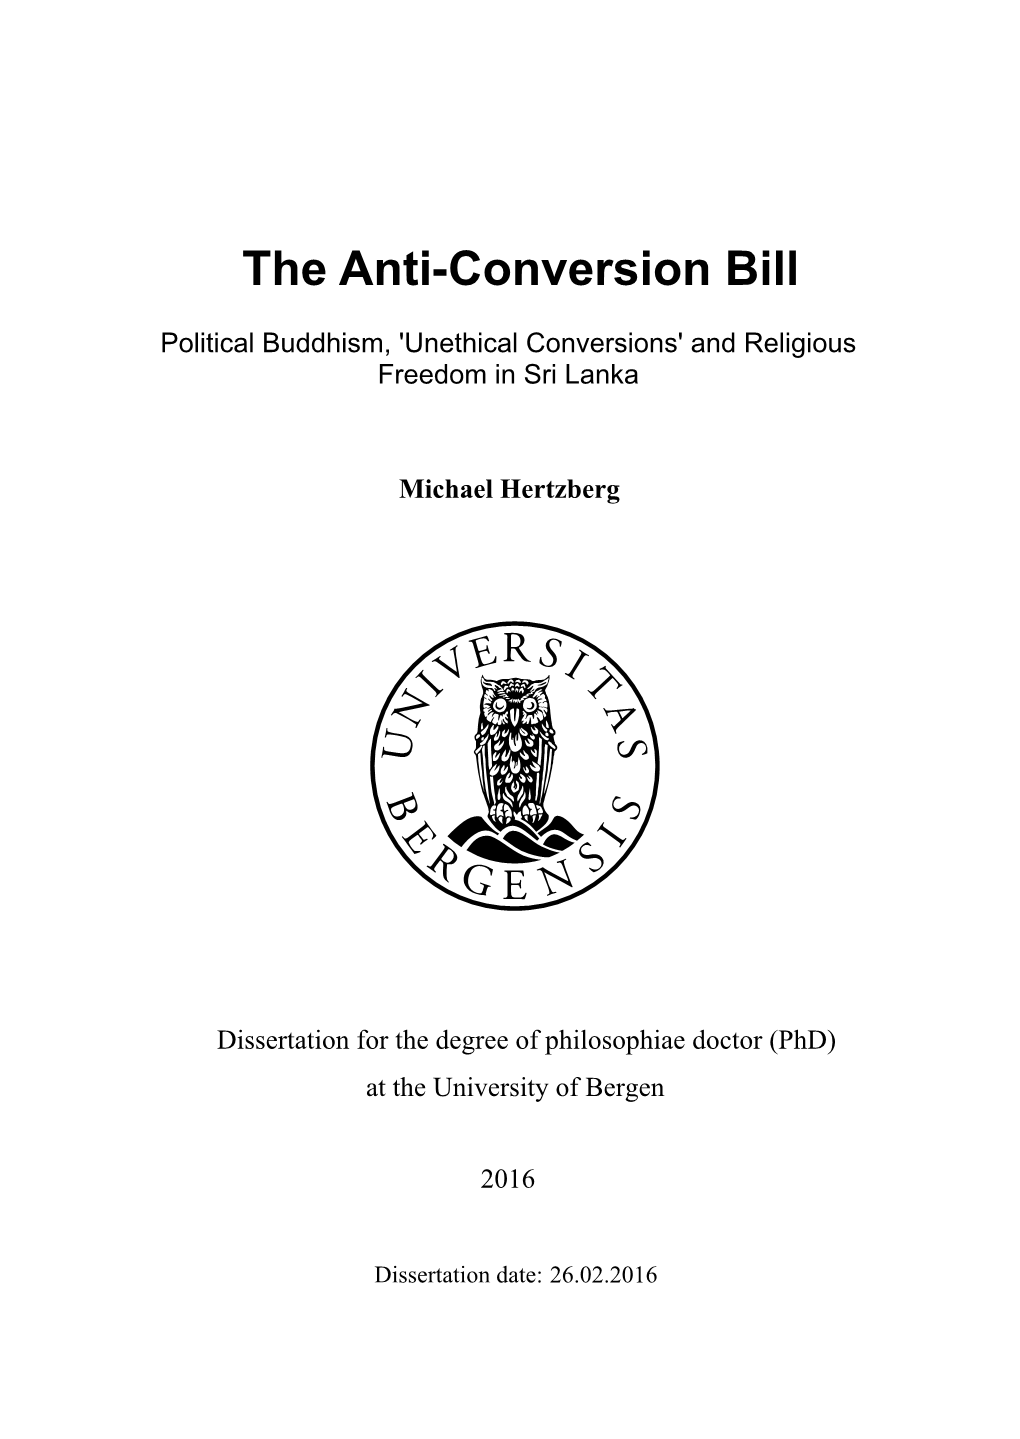 The Anti-Conversion Bill: Political Buddhism, ‘Unethical Conversions’ and Religious Freedom in Sri Lanka